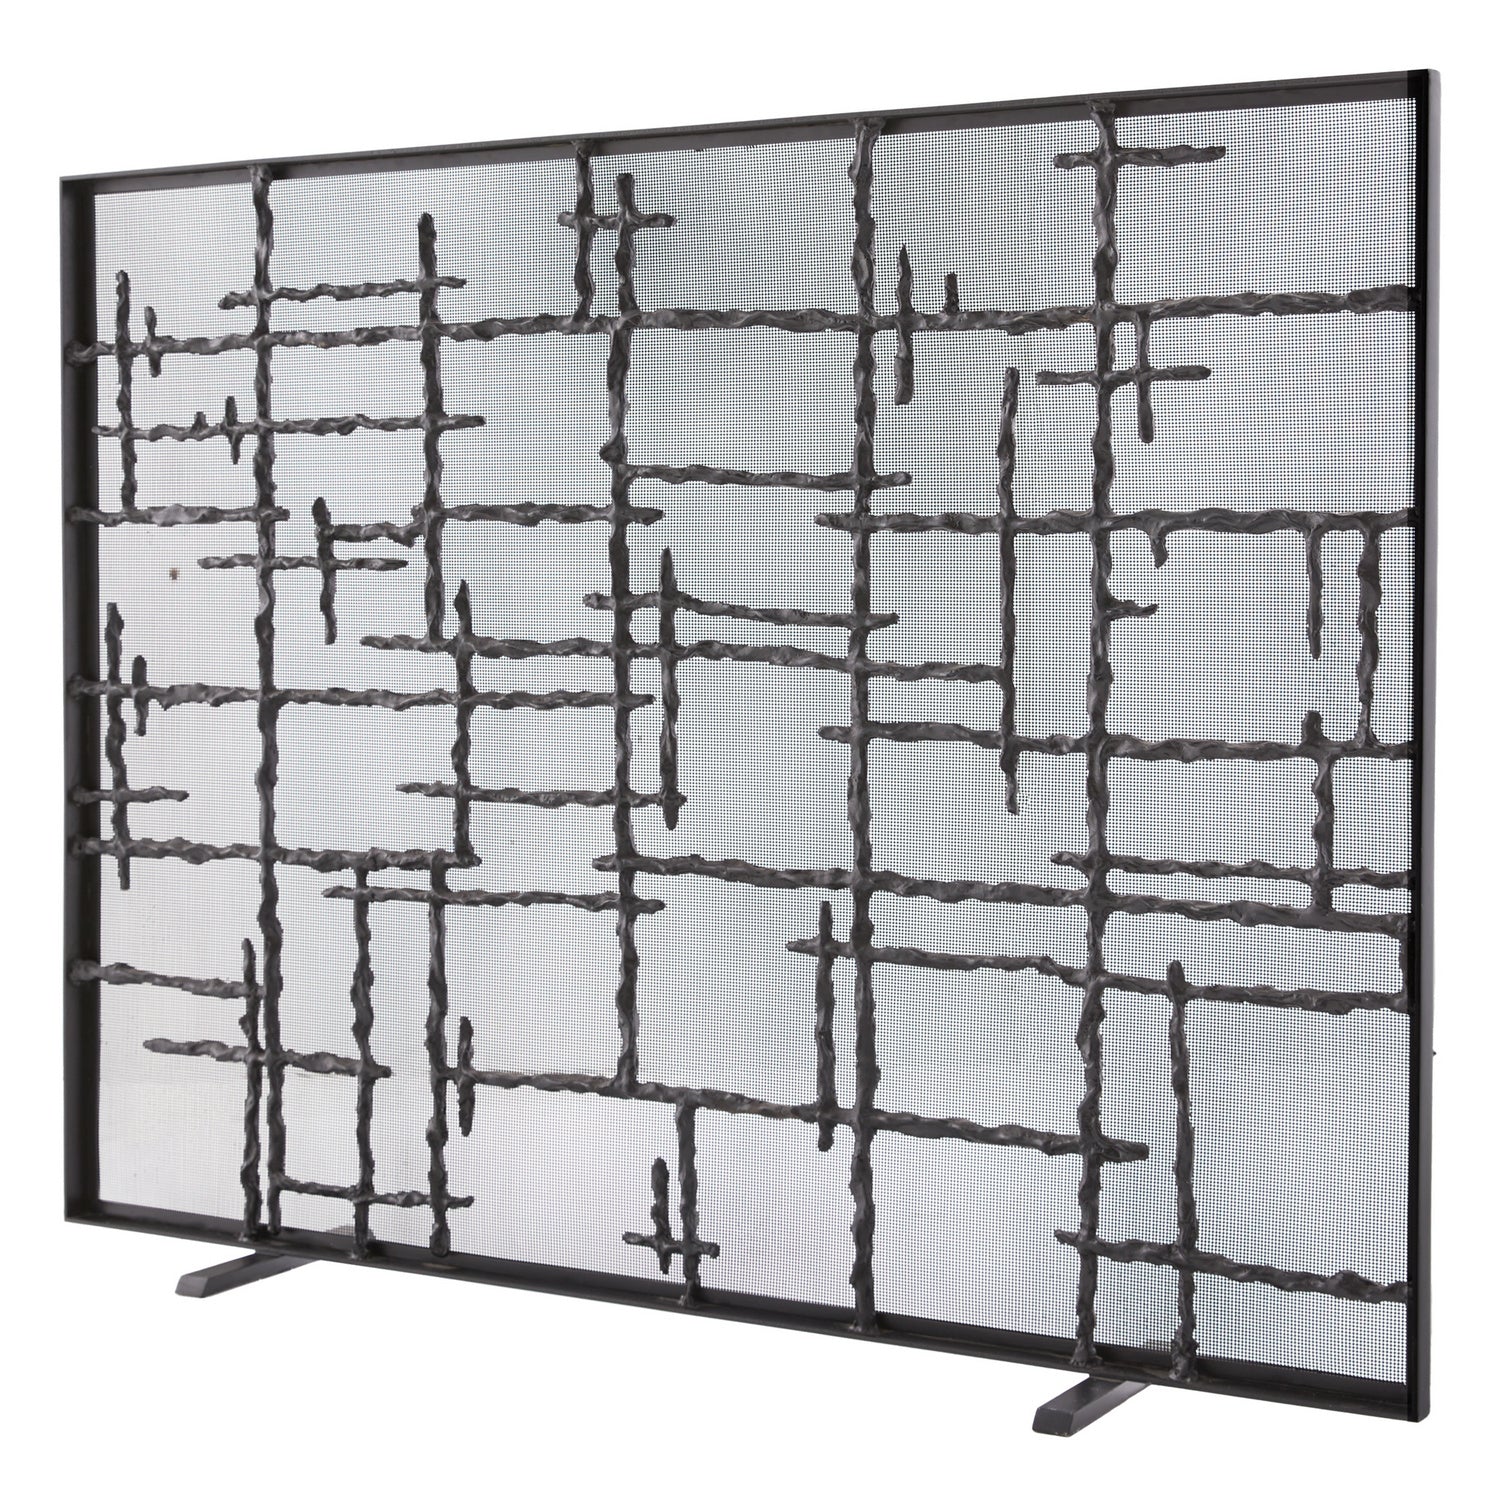 Fire Screen from the Petrova collection in Blackened Iron finish